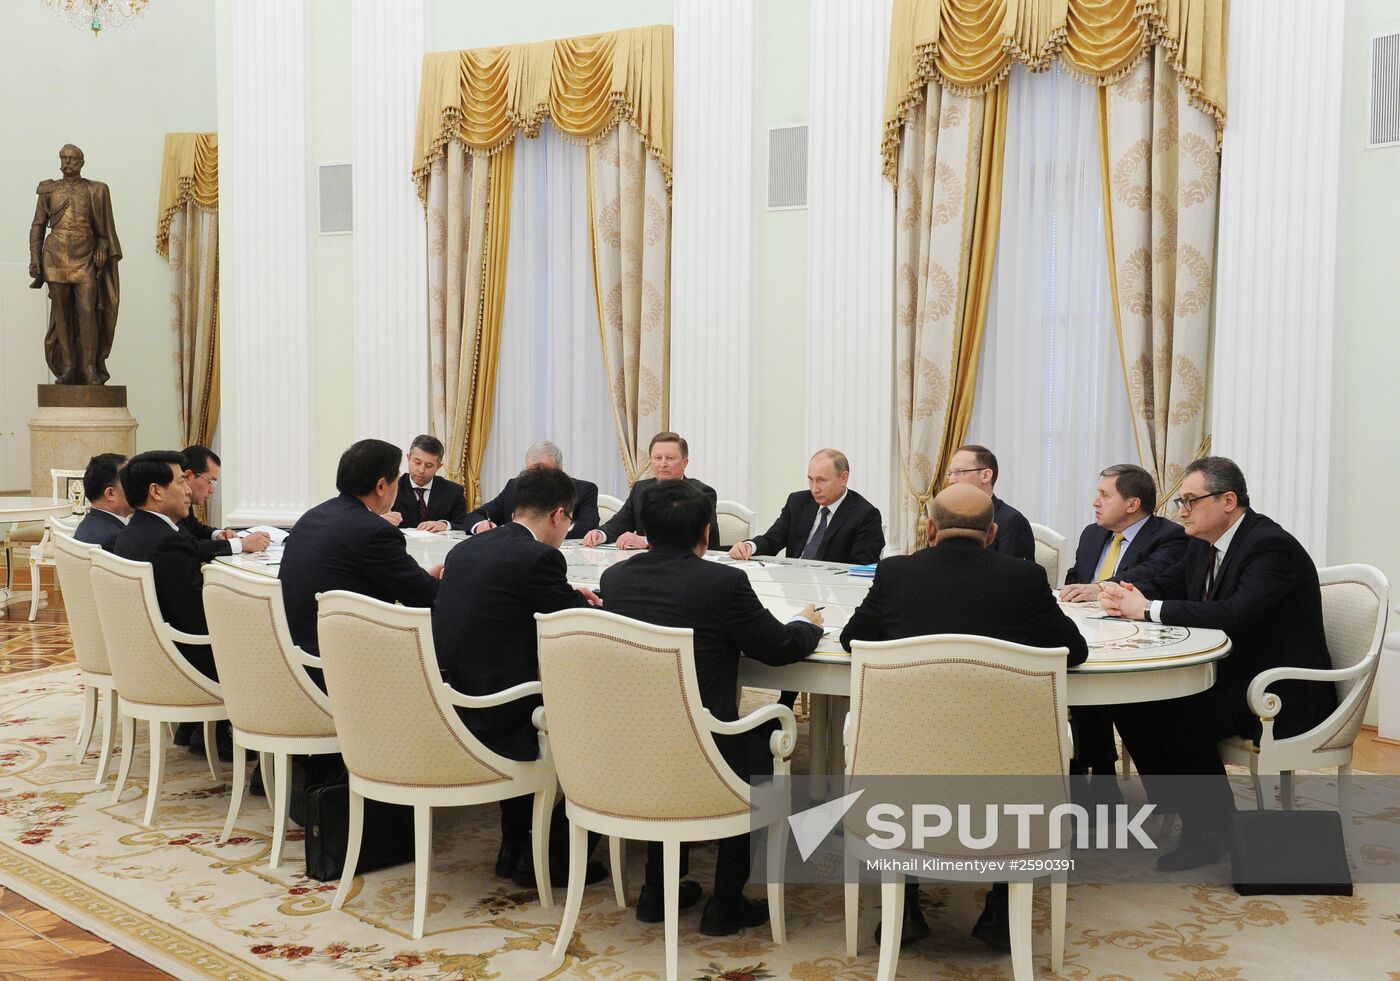 Russian President Vladimir Putin meets with Li Zhanshu, Director of the Chinese Communist Party's General Officegeneral